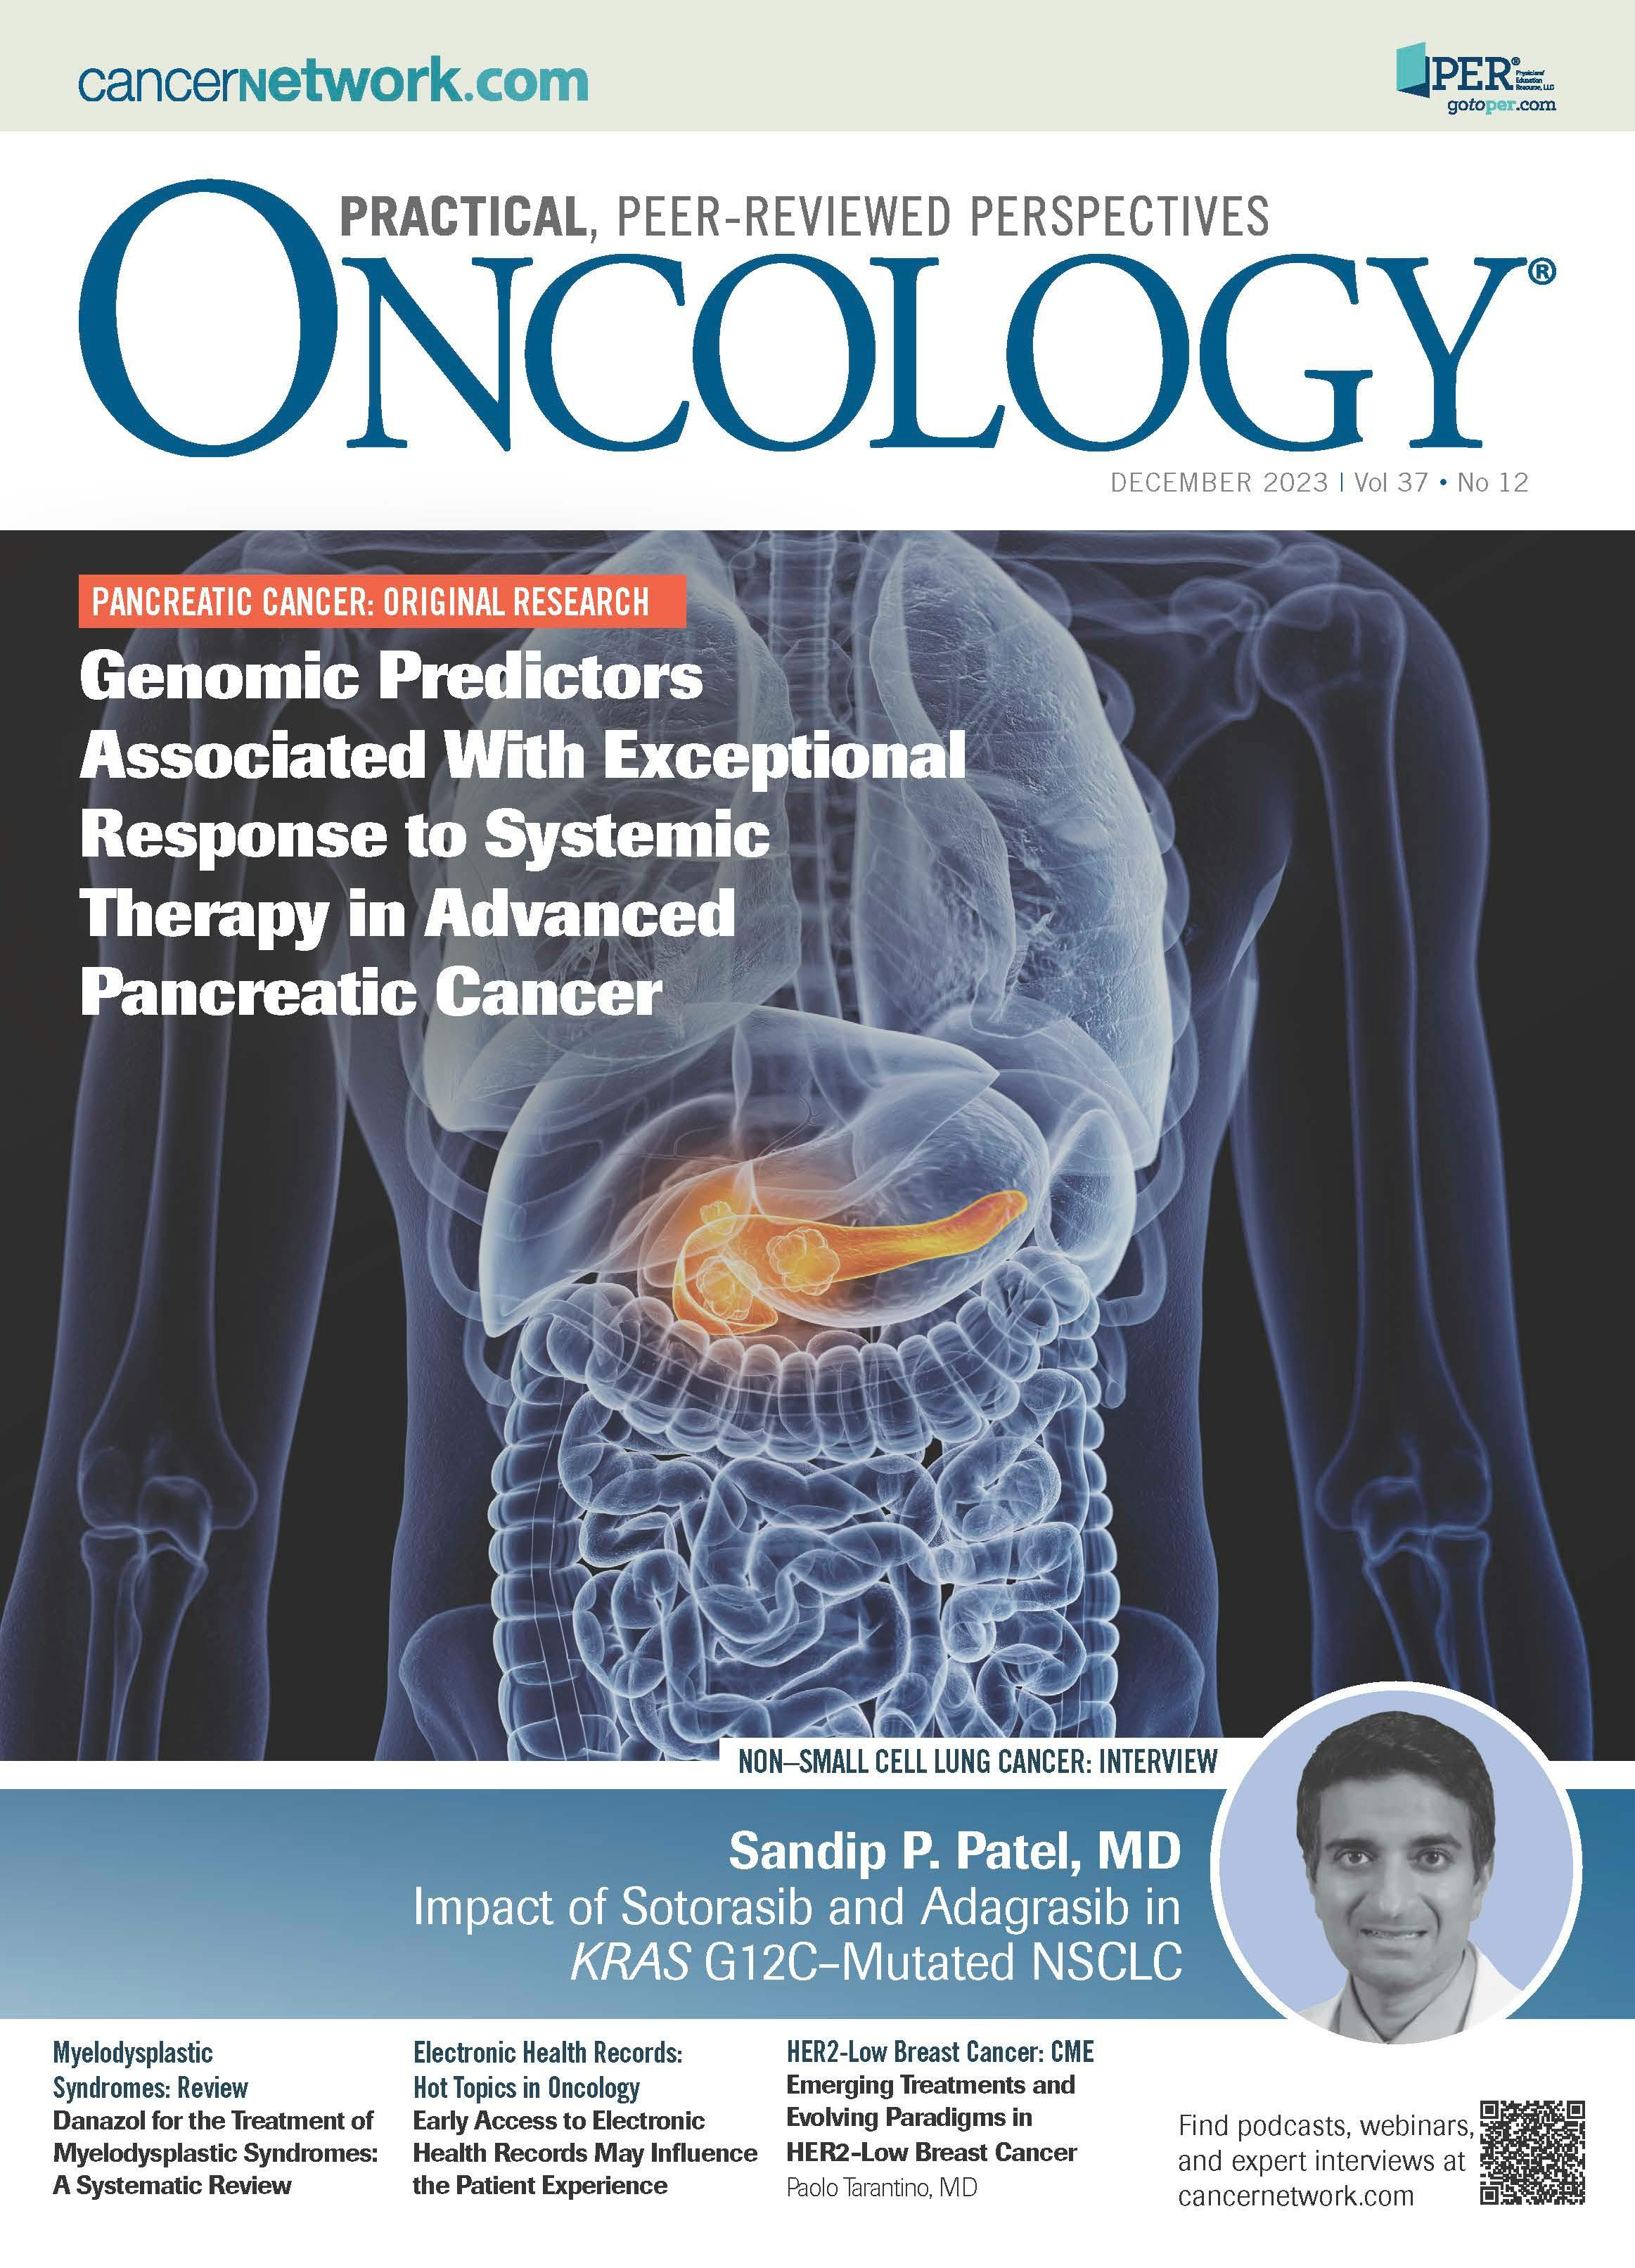 ONCOLOGY Vol 37, Issue 12